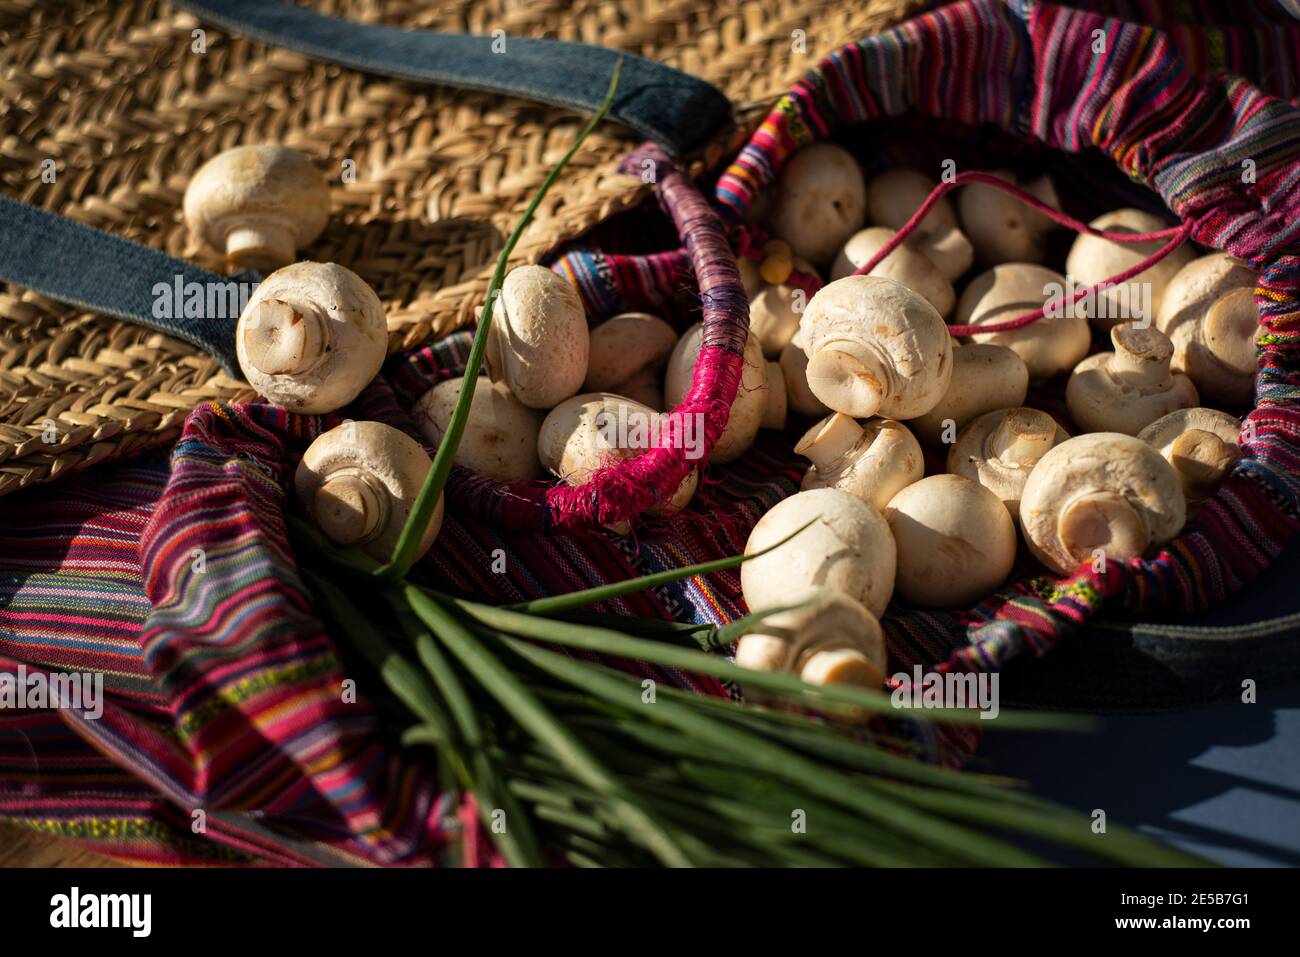 Champignons and spings onions are poured out of a wicker boho bag. The theme of healthy eating and sustainable living. Stock Photo